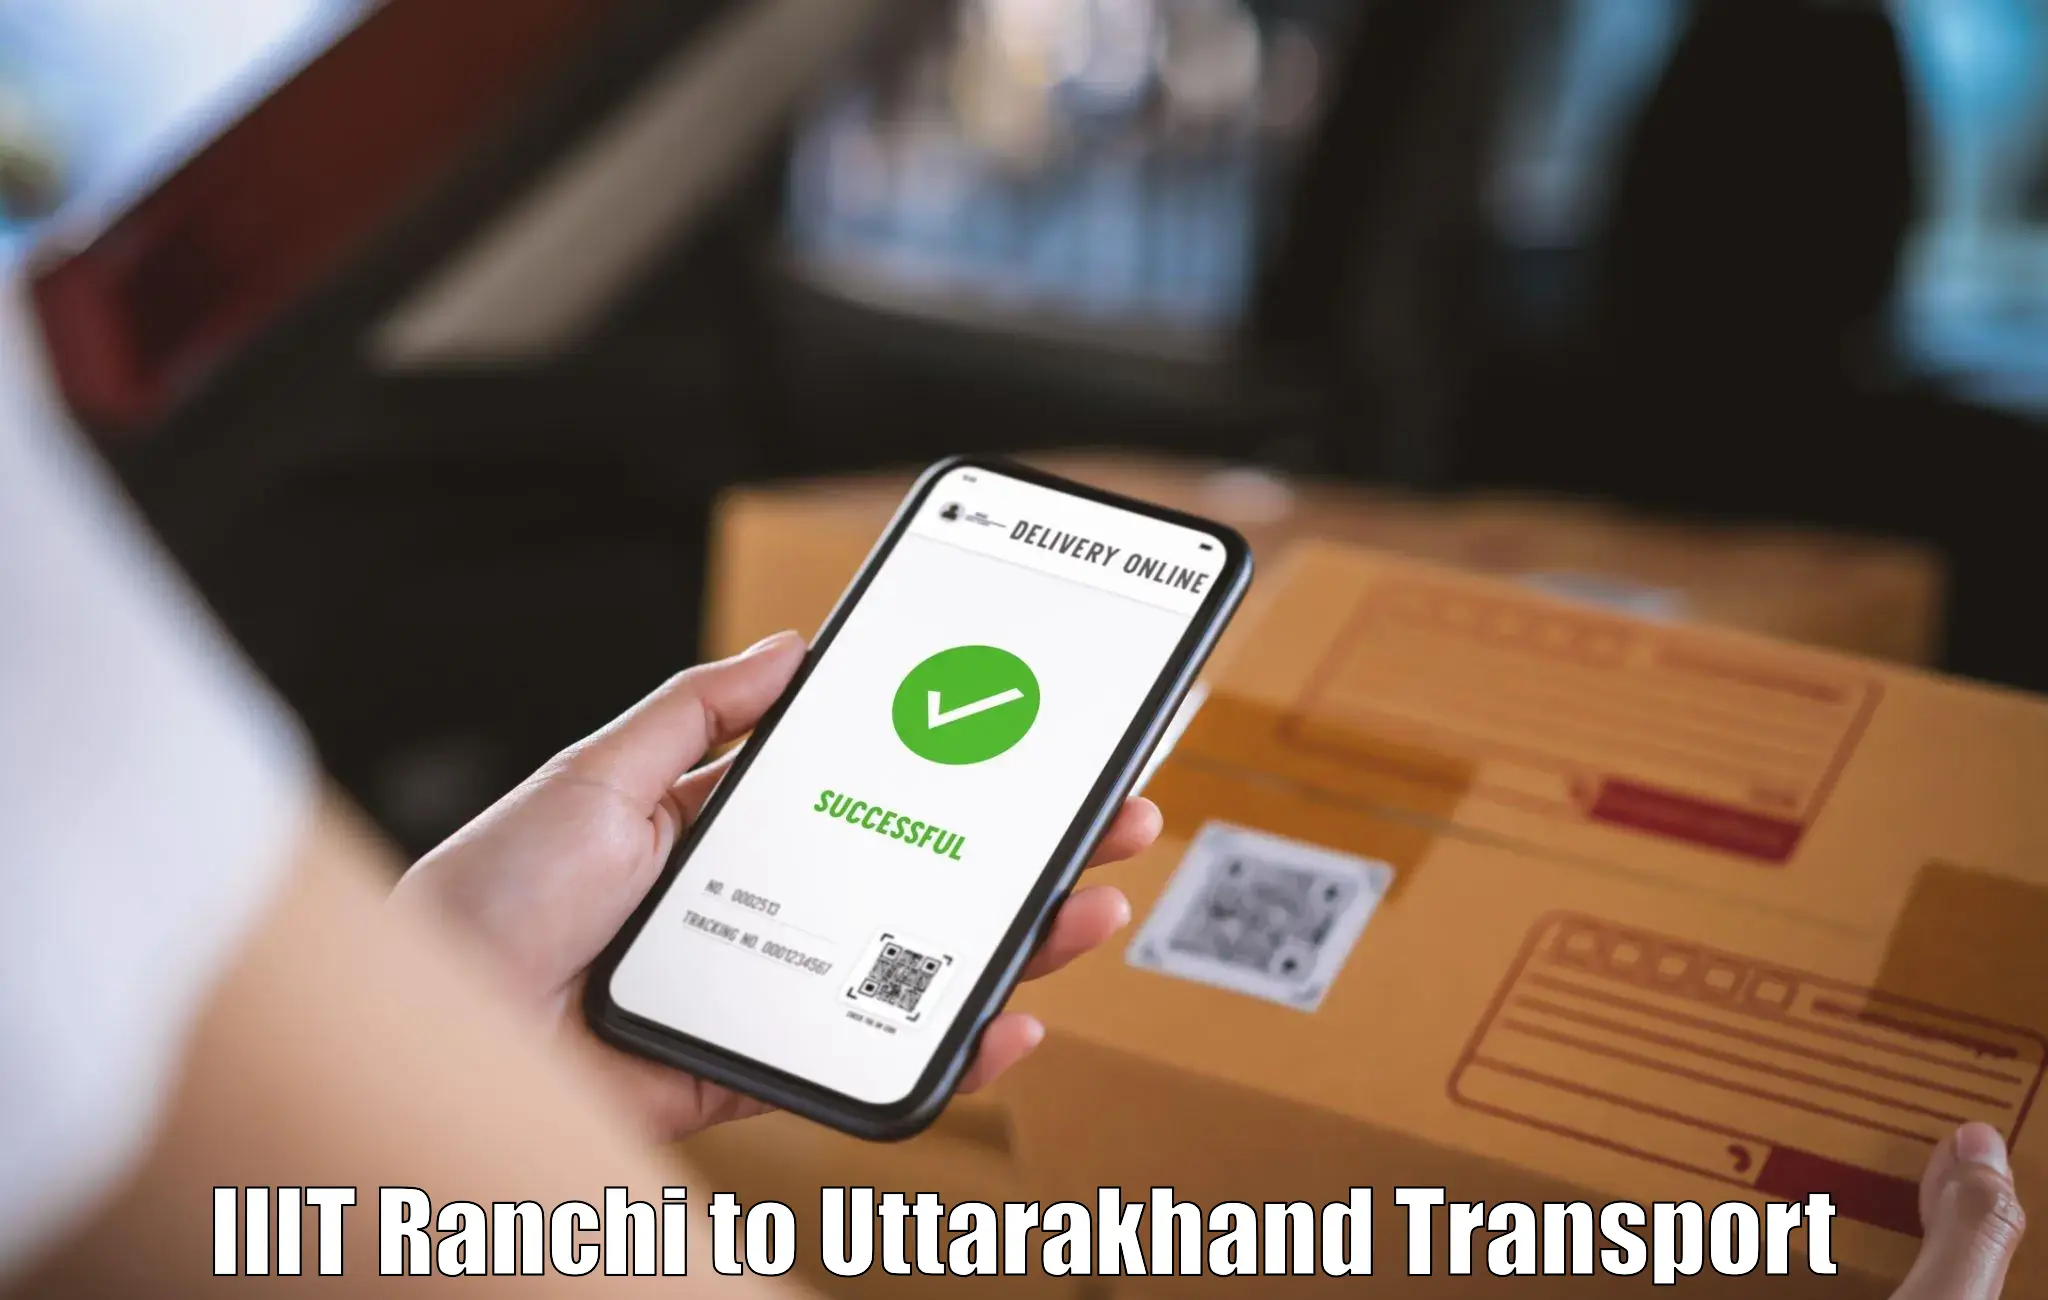 Express transport services IIIT Ranchi to Roorkee